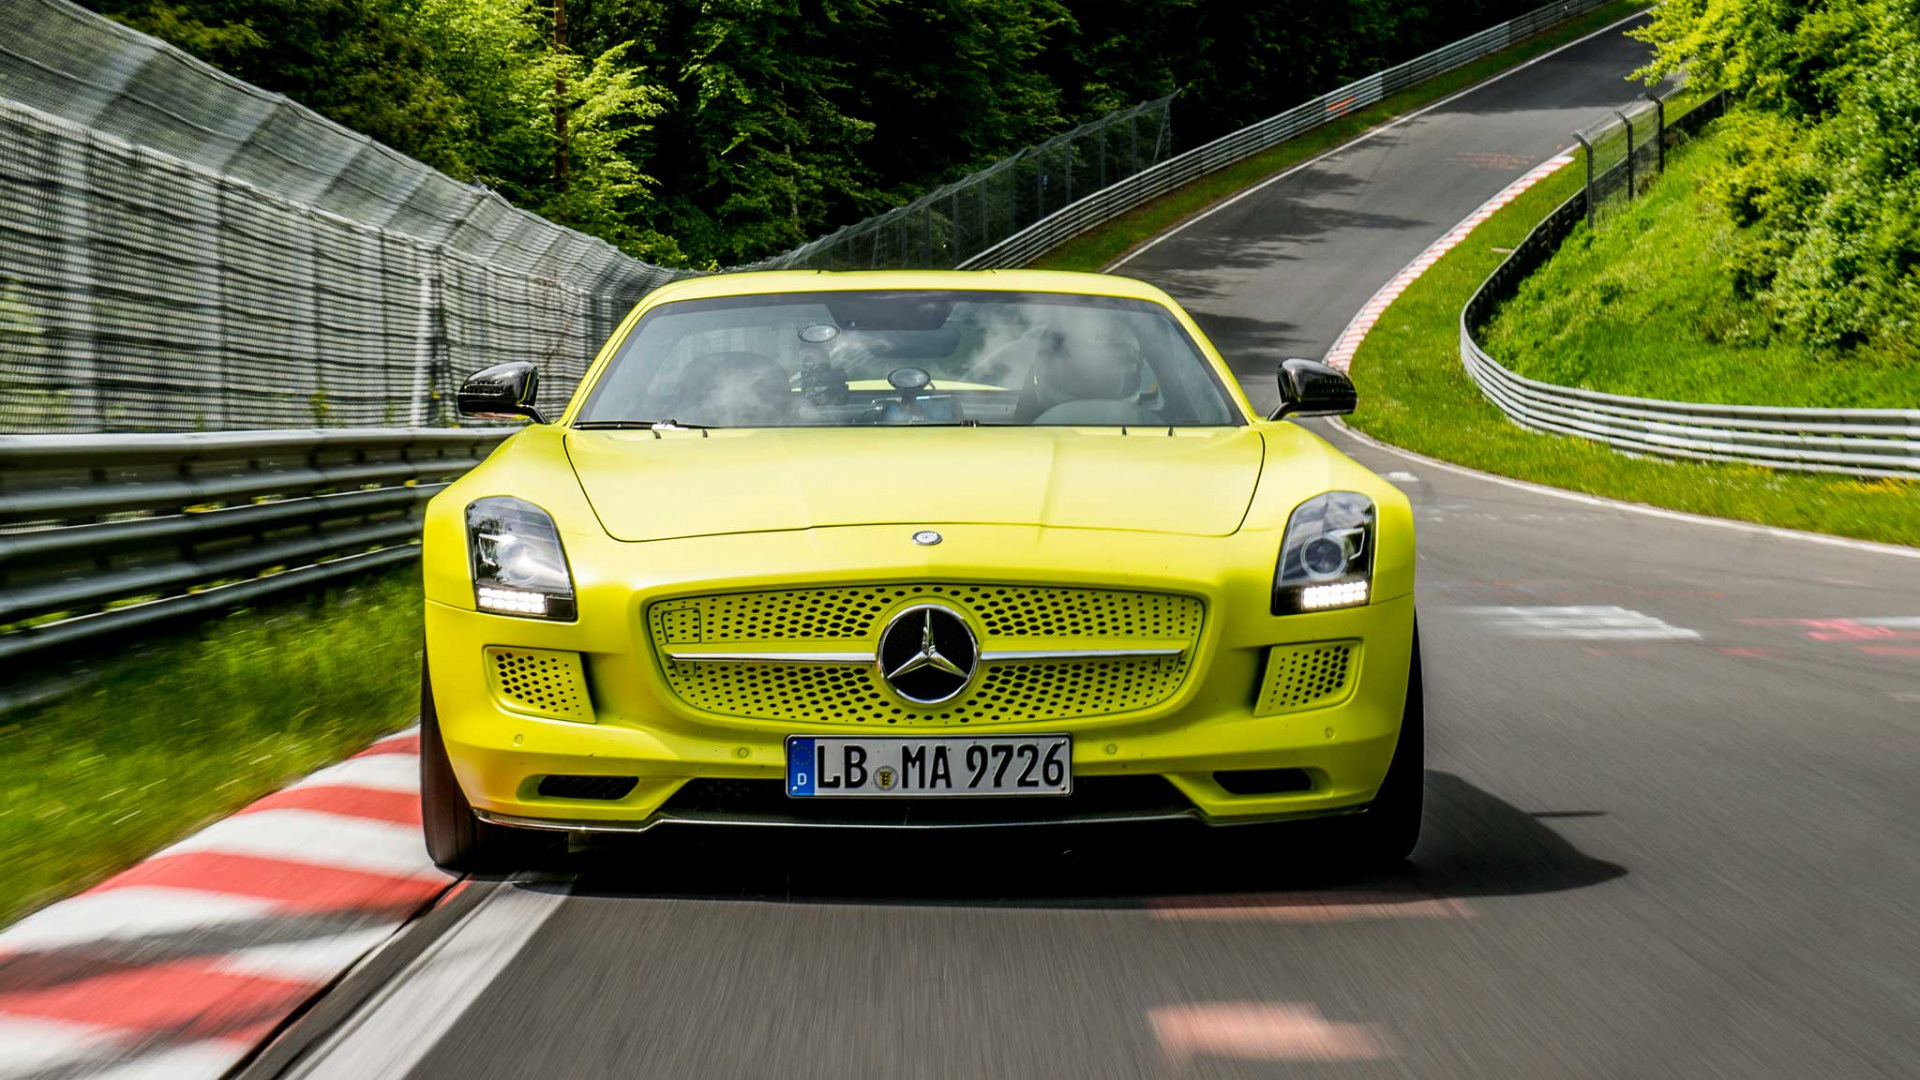 Yellow Mercedes Benz Car on Road During Daytime. Wallpaper in 1920x1080 Resolution